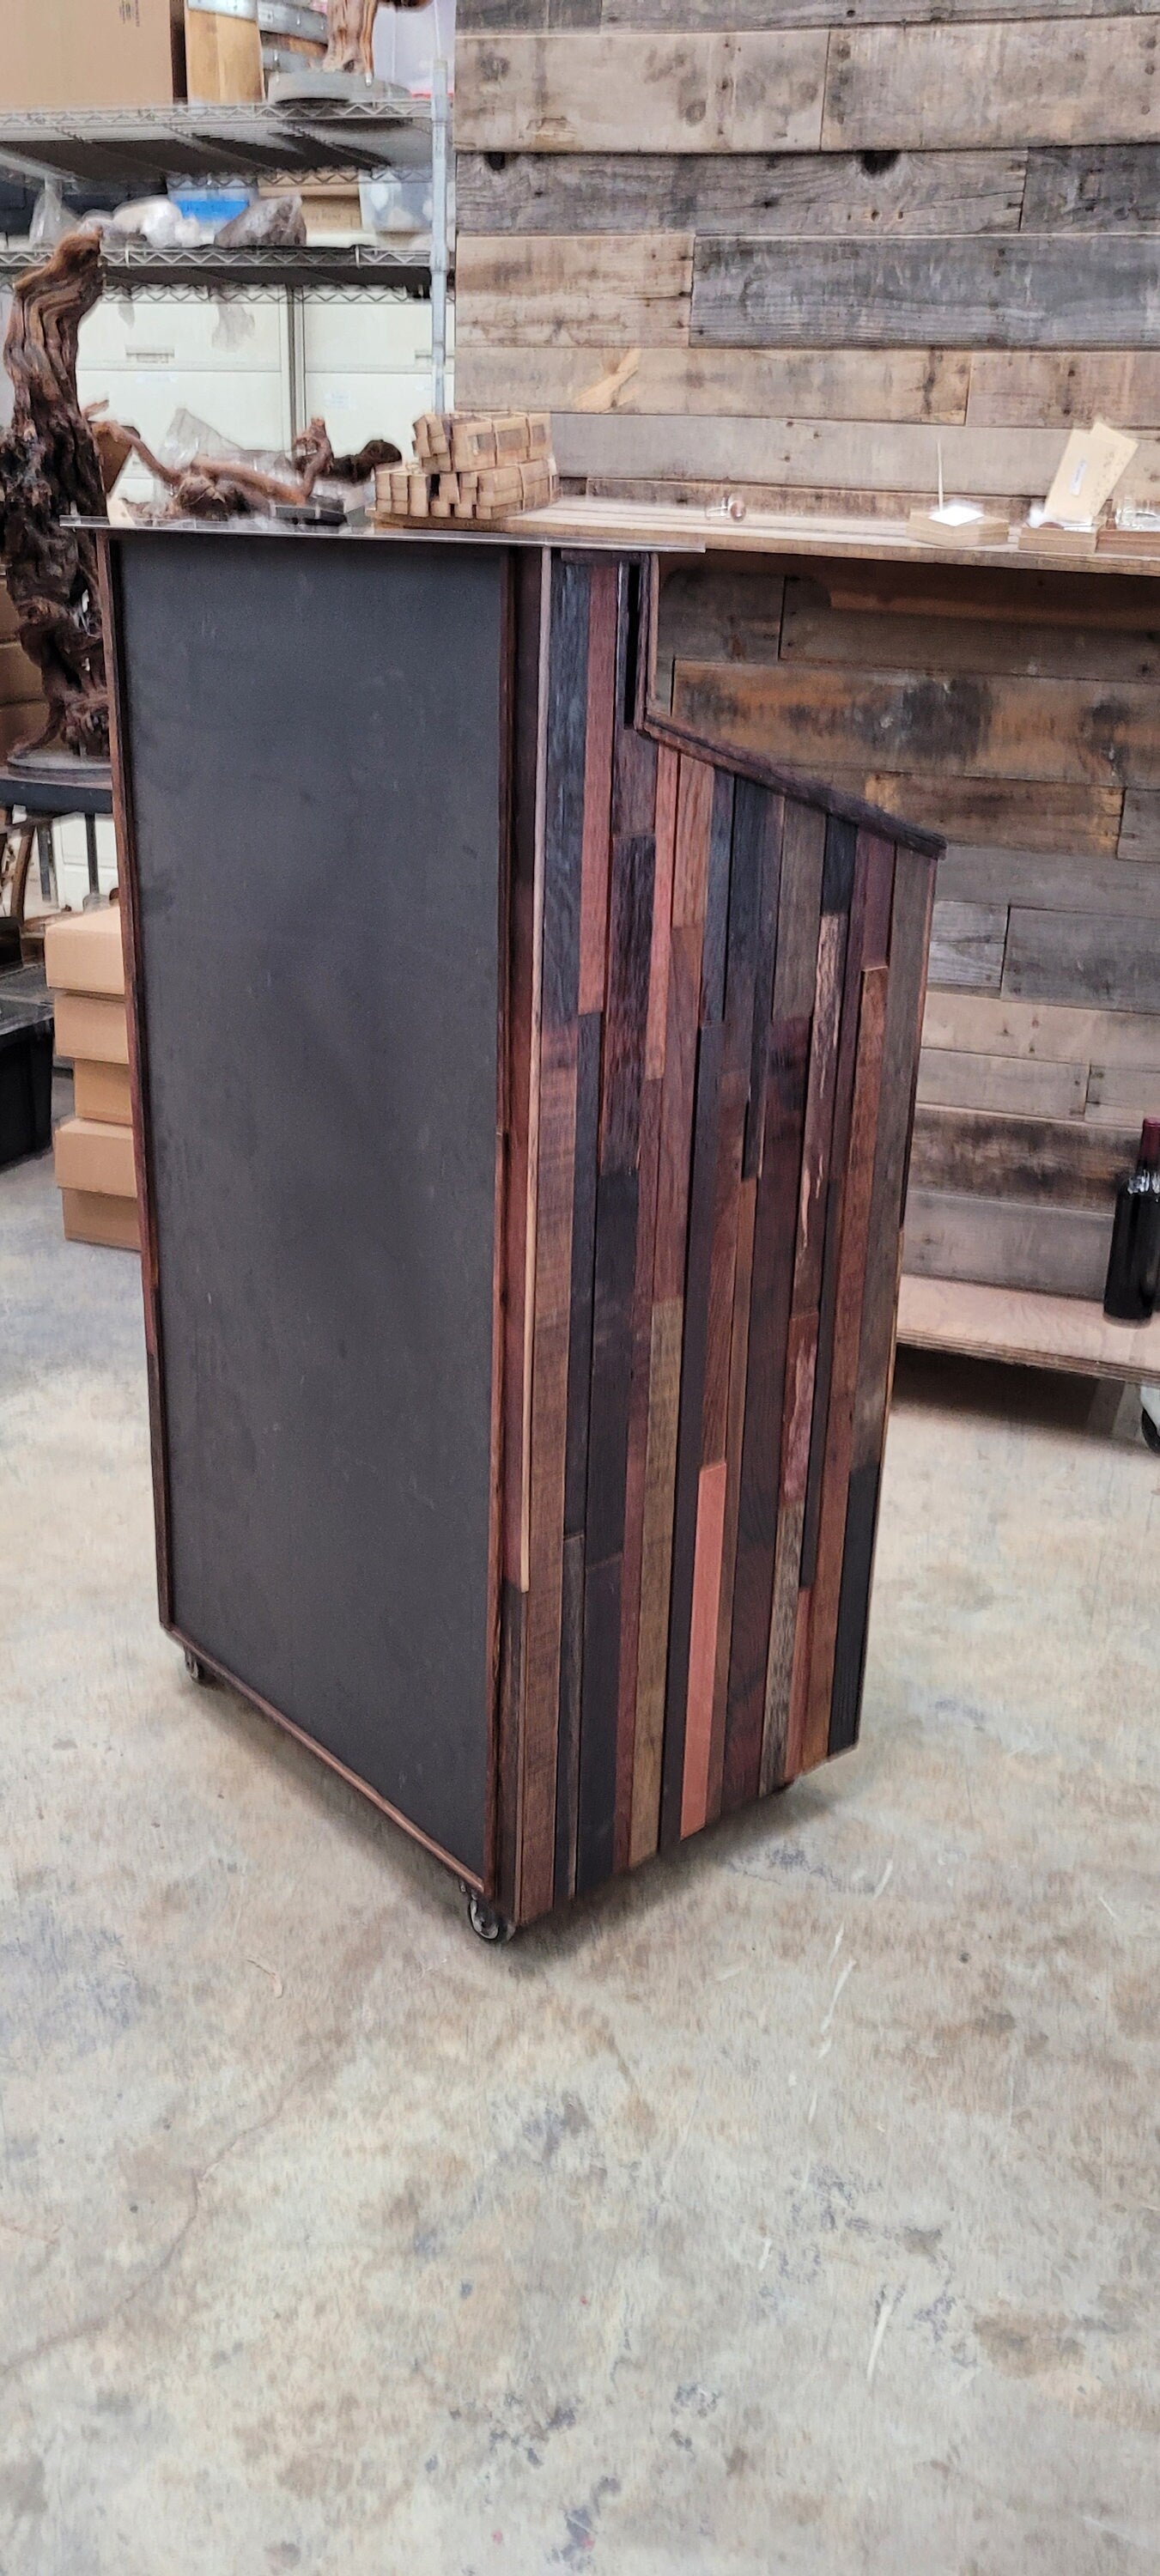 Hostess Stand Lectern POS - Leggio - made from reclaimed California oak wine barrels with chalkboard. 100% Recycled!